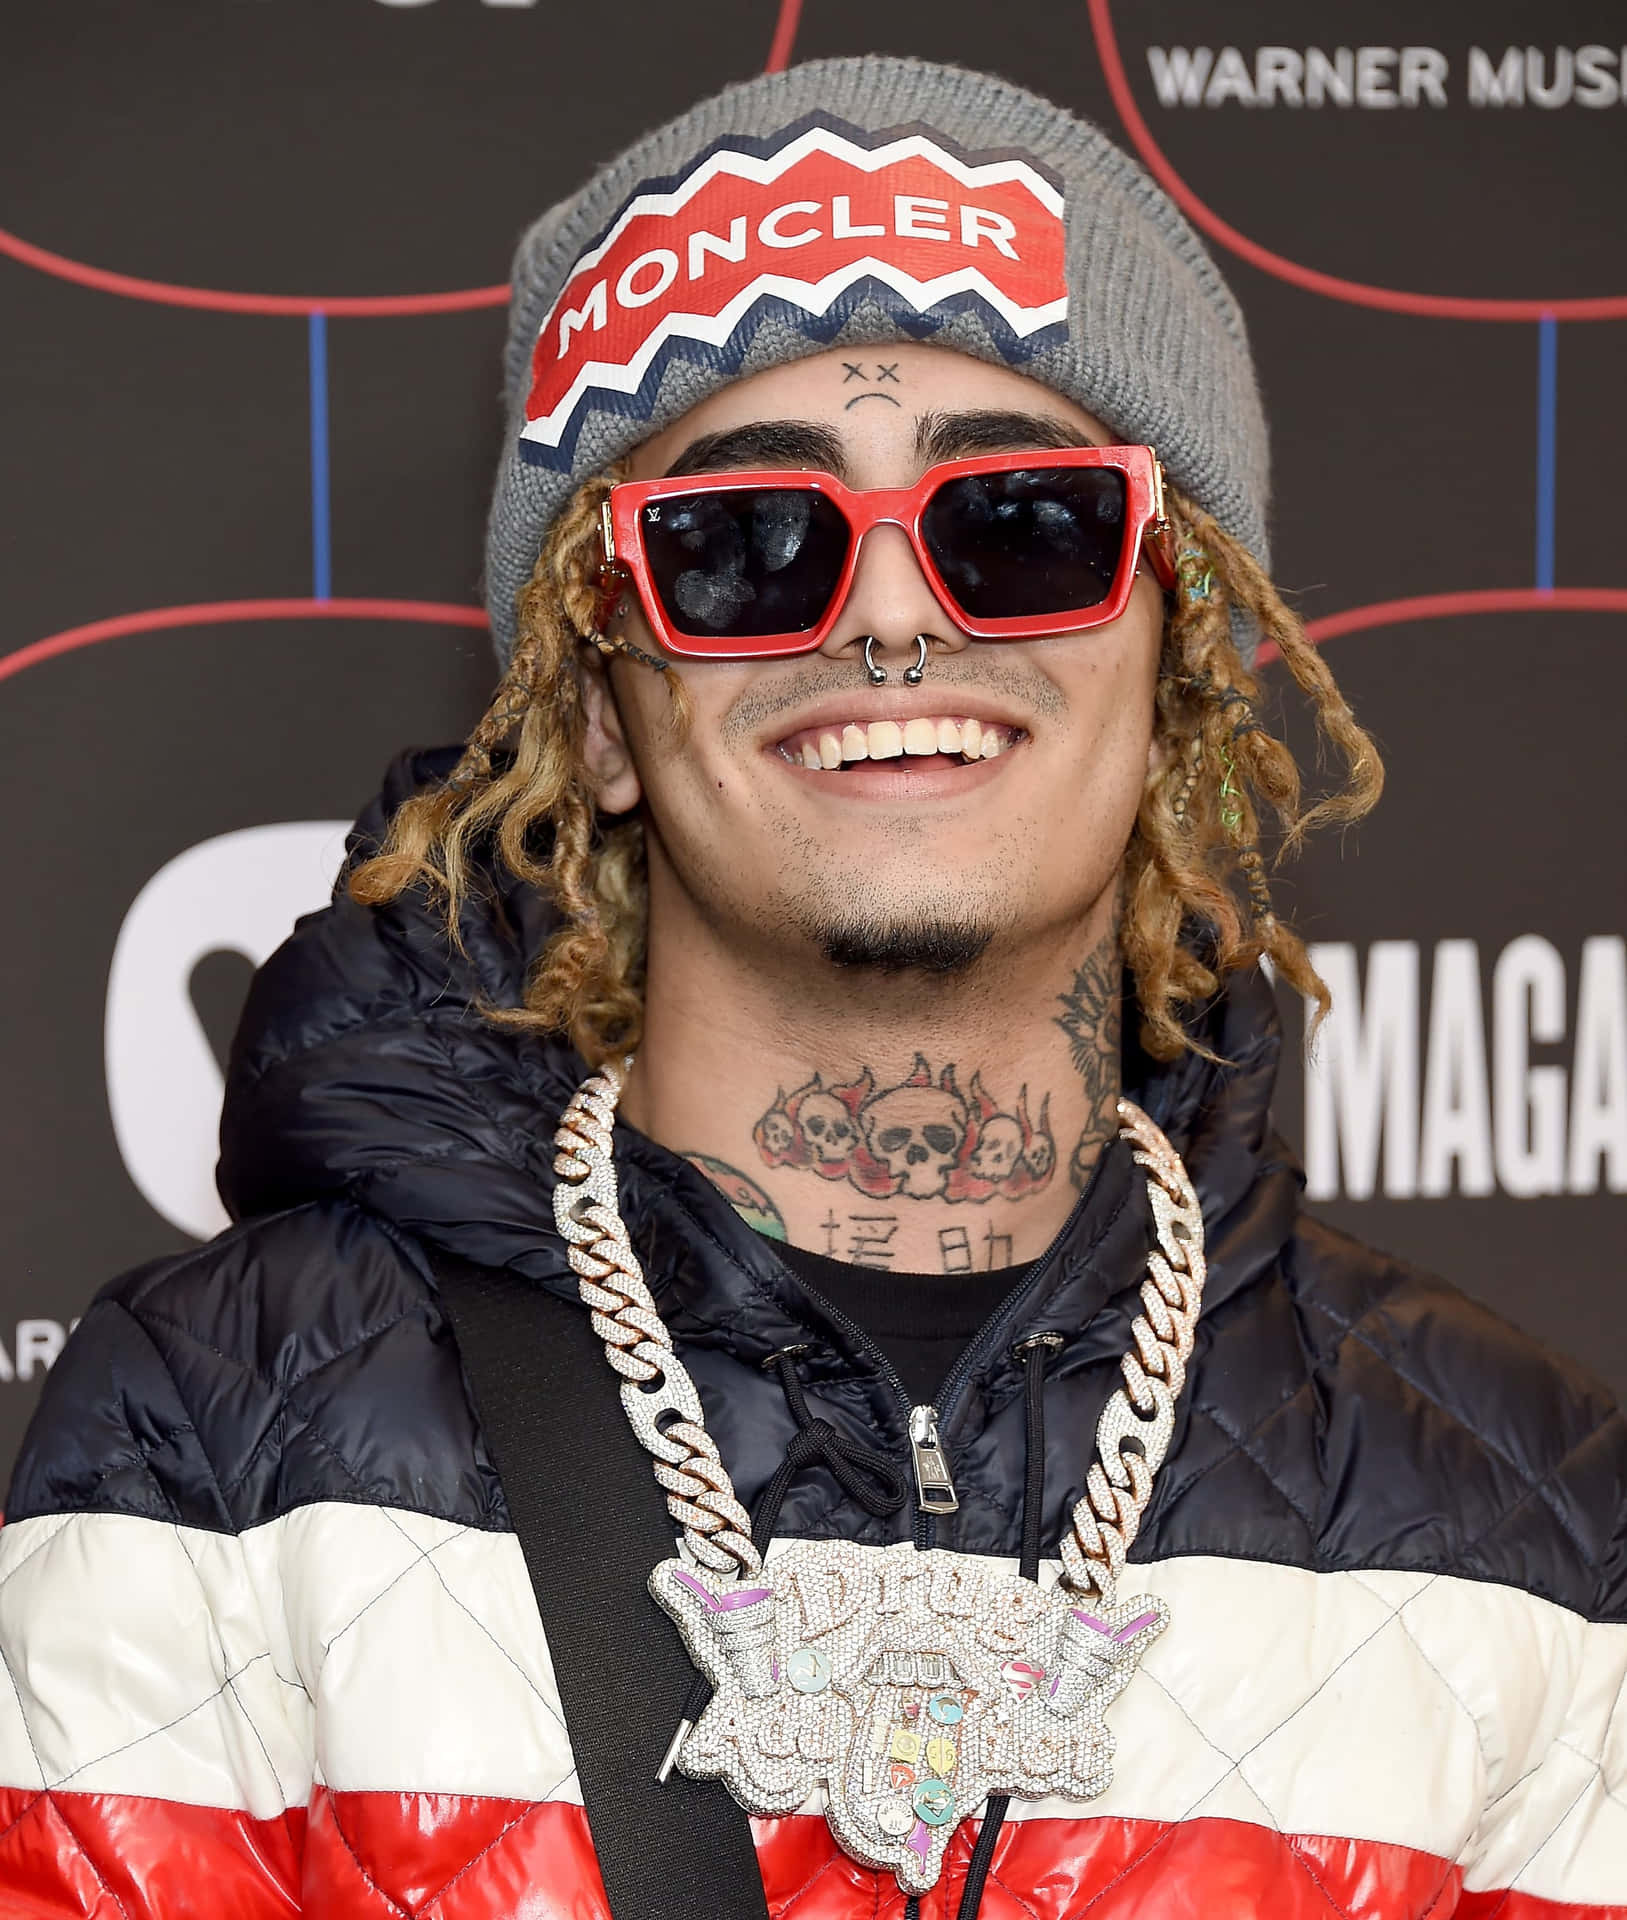 Lil Pump, the rapper, songwriter and record producer. Wallpaper